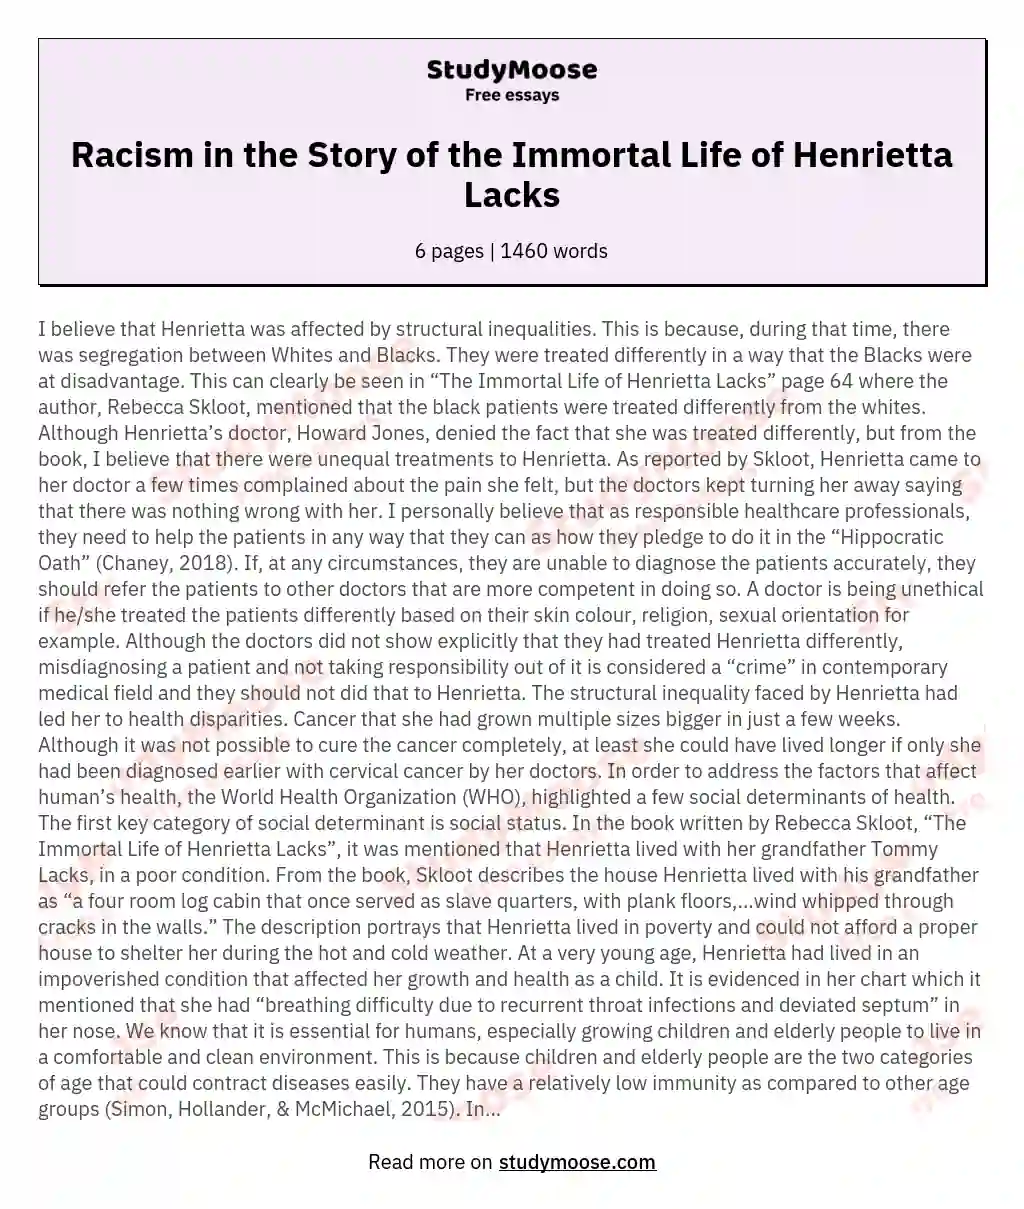 Racism in the Story of the Immortal Life of Henrietta Lacks essay